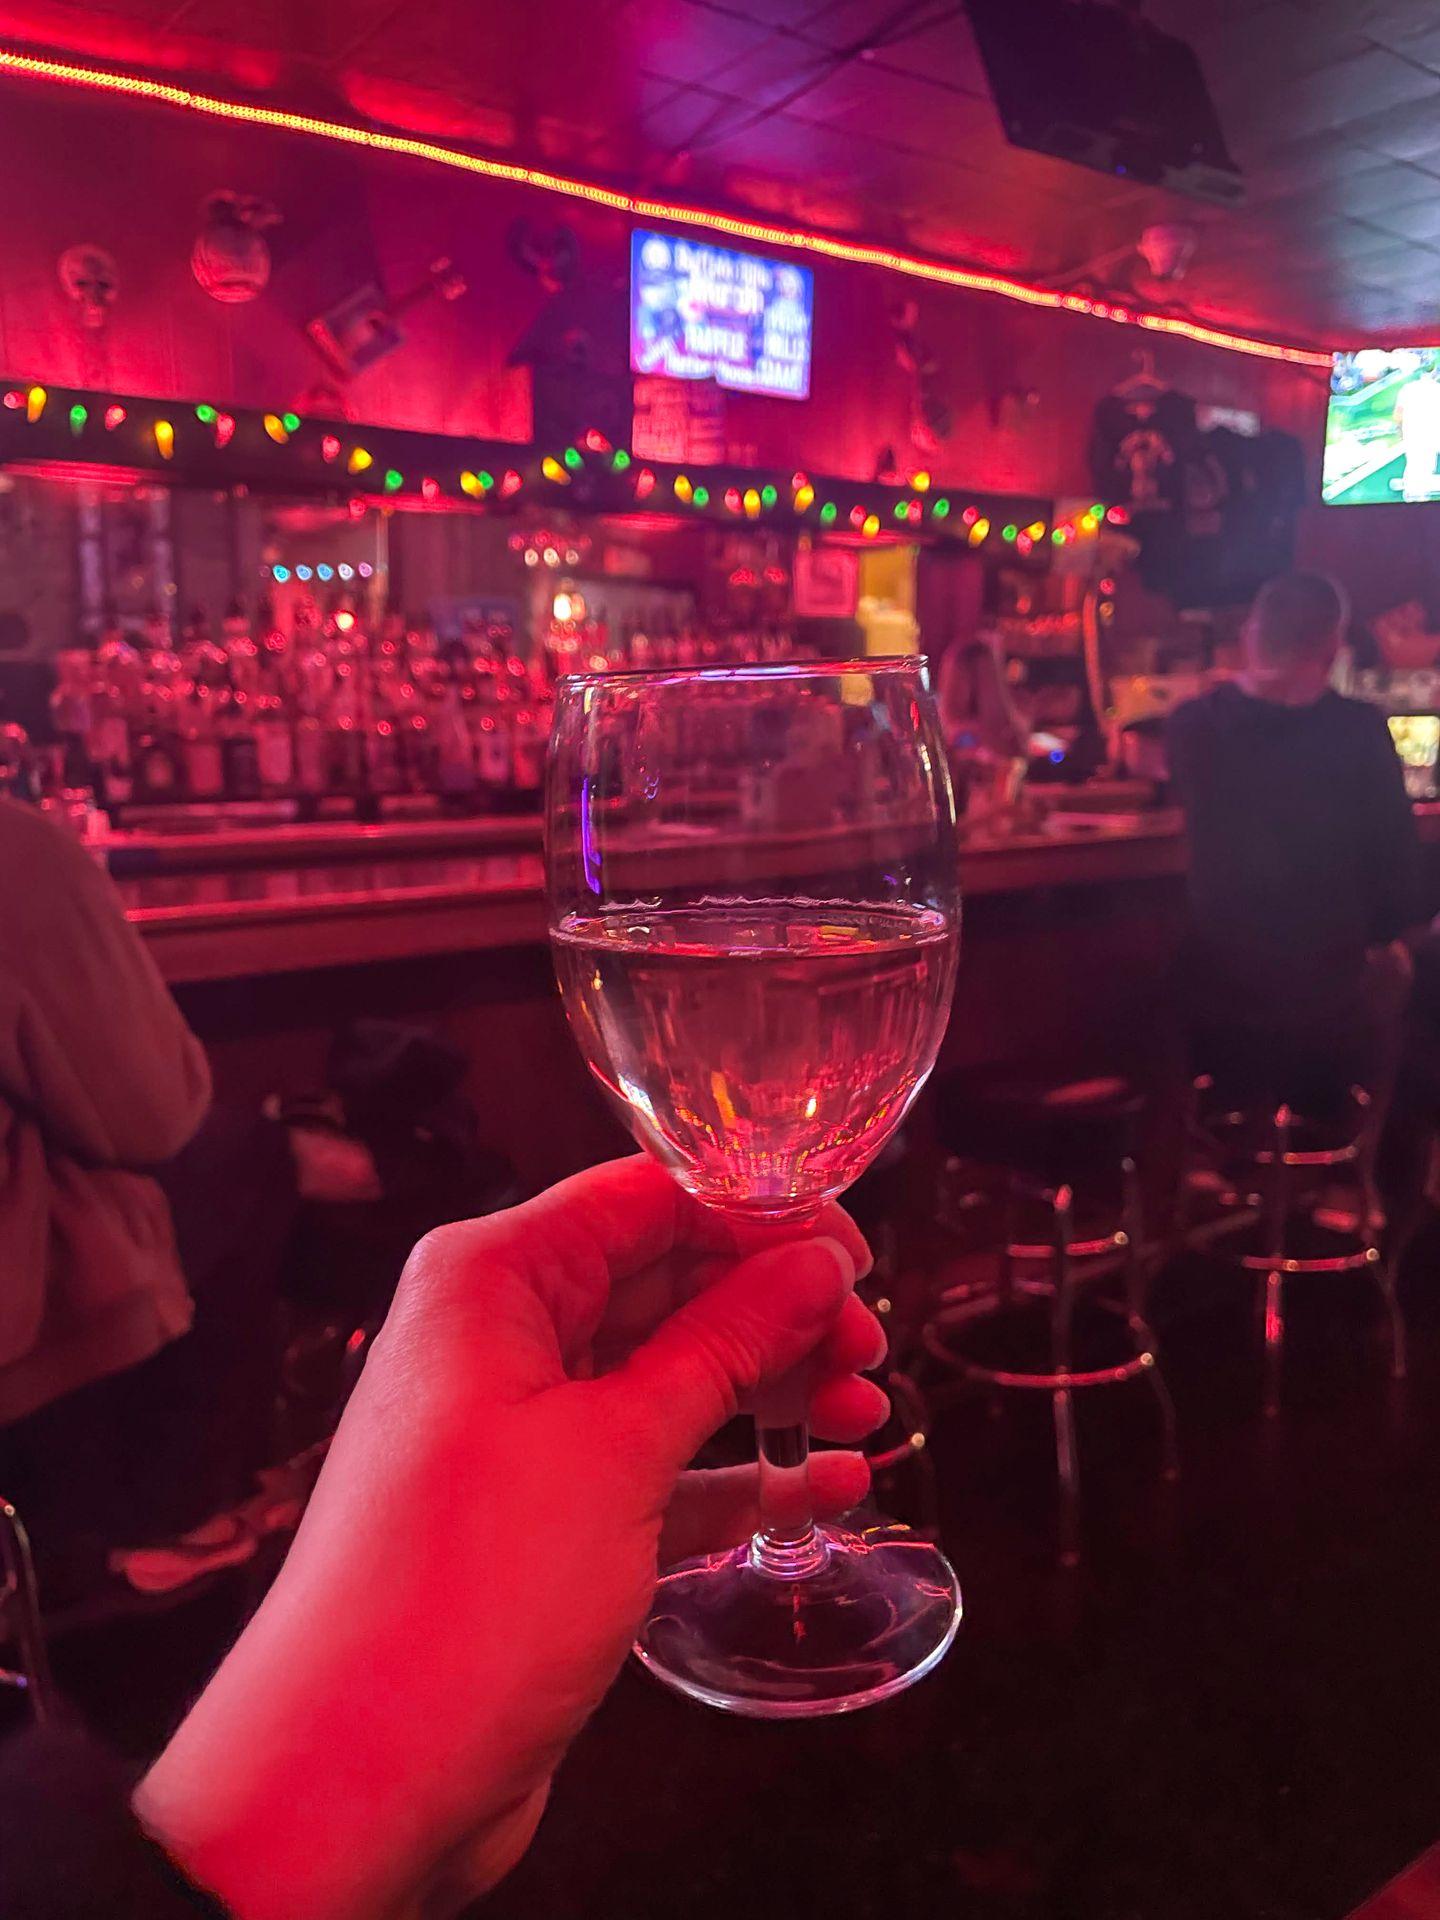 Holding up a glass with wine inside of a dimly lit bar with red lights.